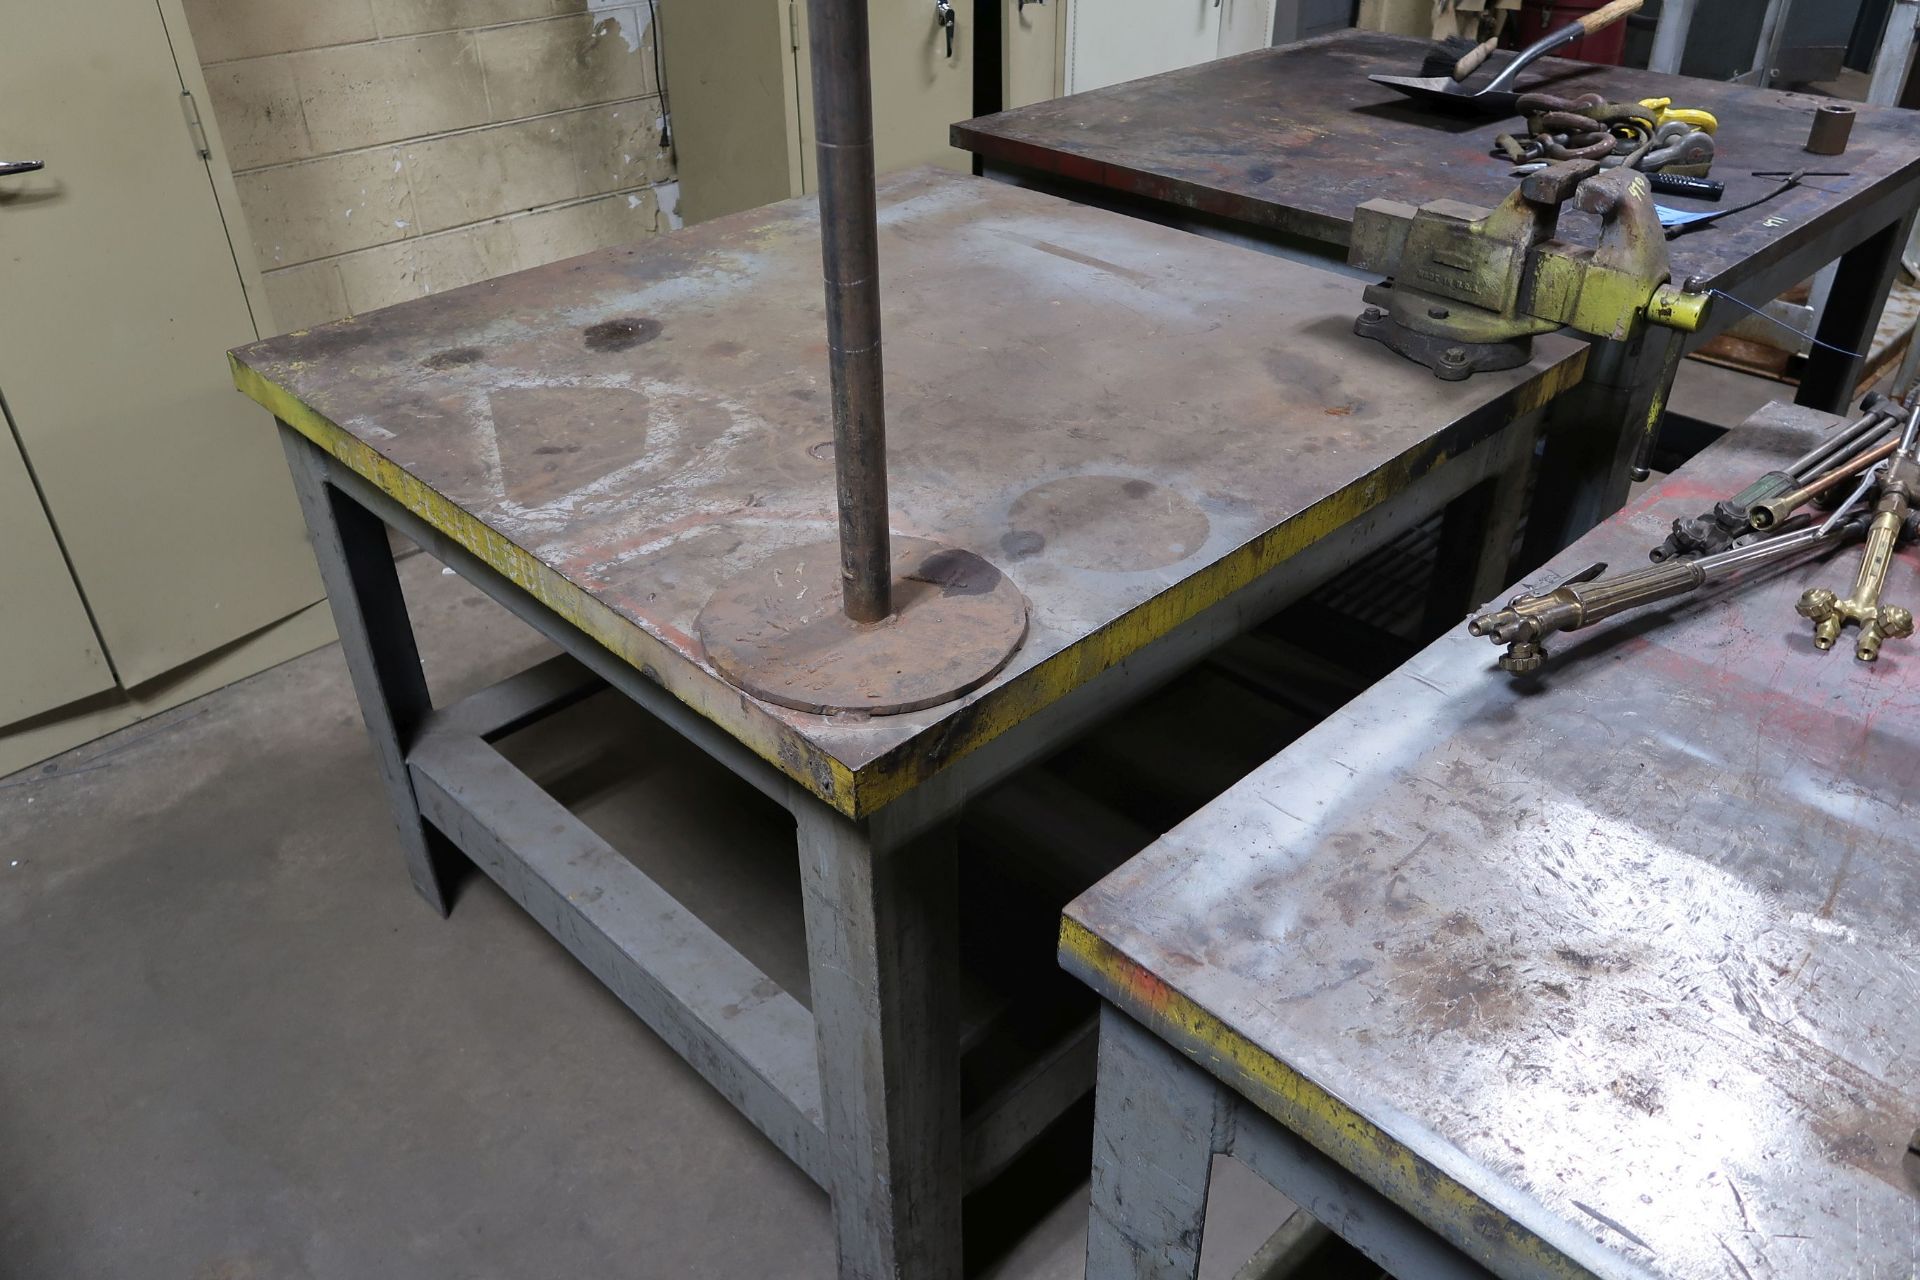 4' X 4' HEAVY DUTY STEEL WELDING TABLE WITH 4" BENCH VISE